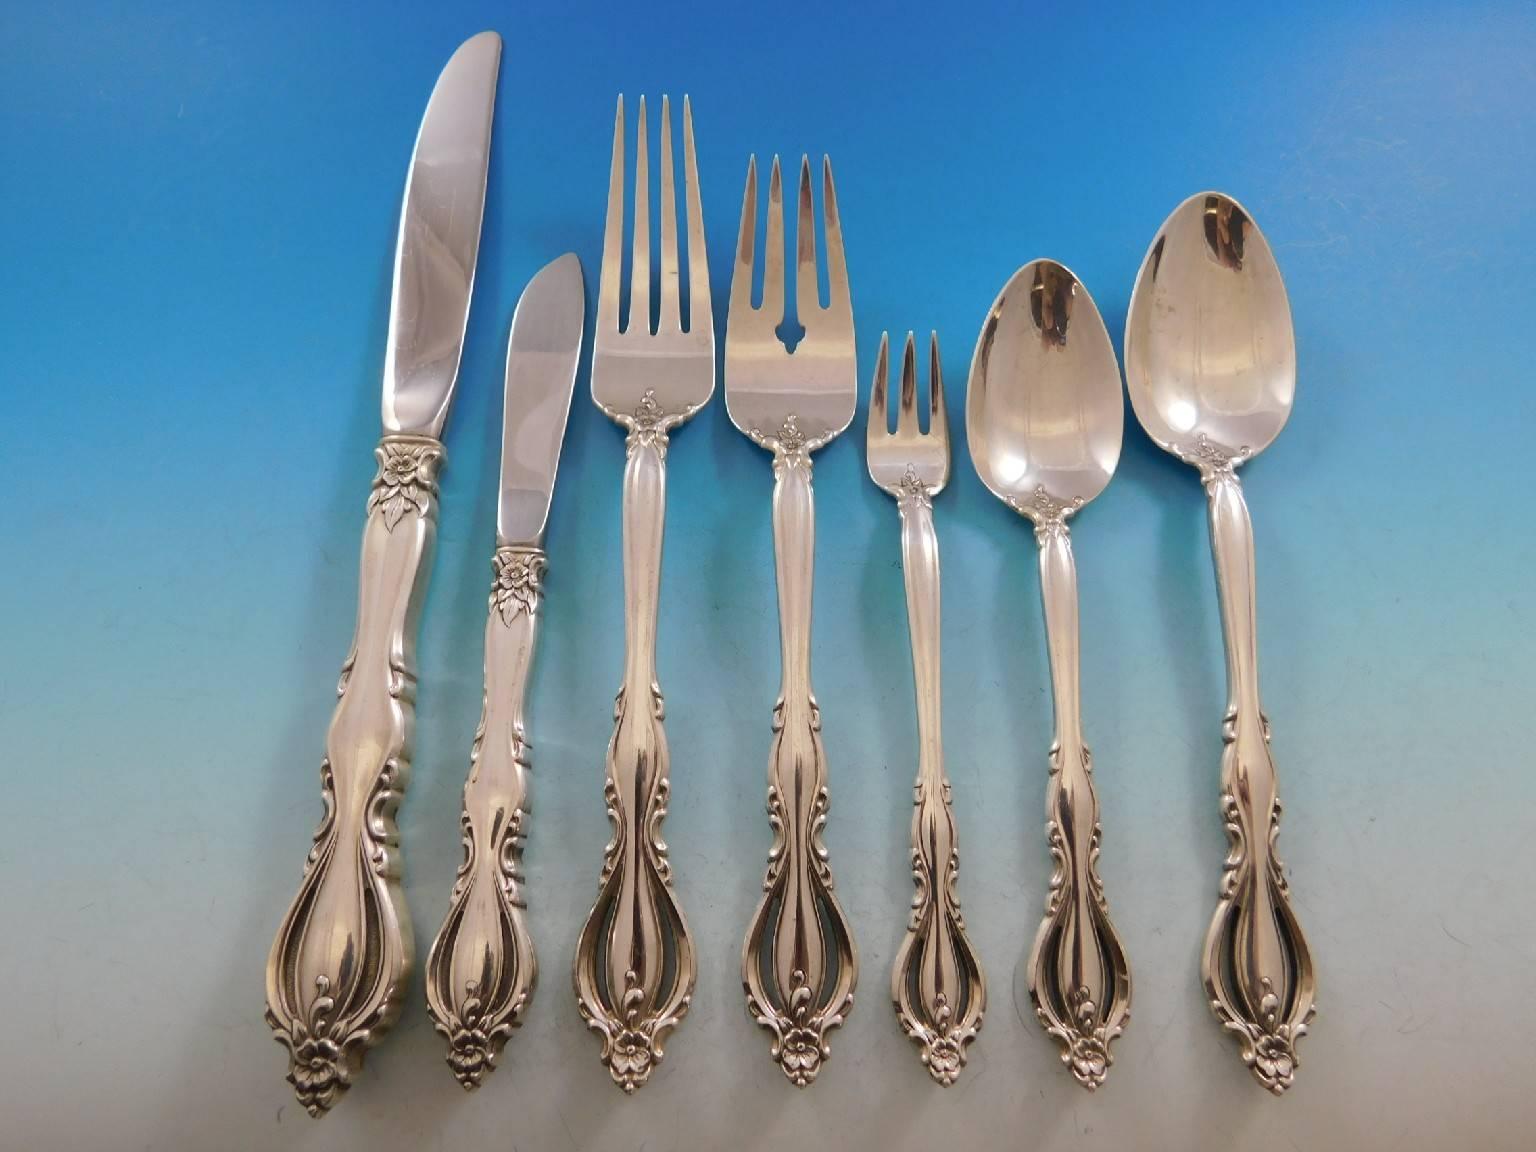 Grande Regency by International sterling silver flatware set, 87 pieces. This set includes:

12 knives, 9